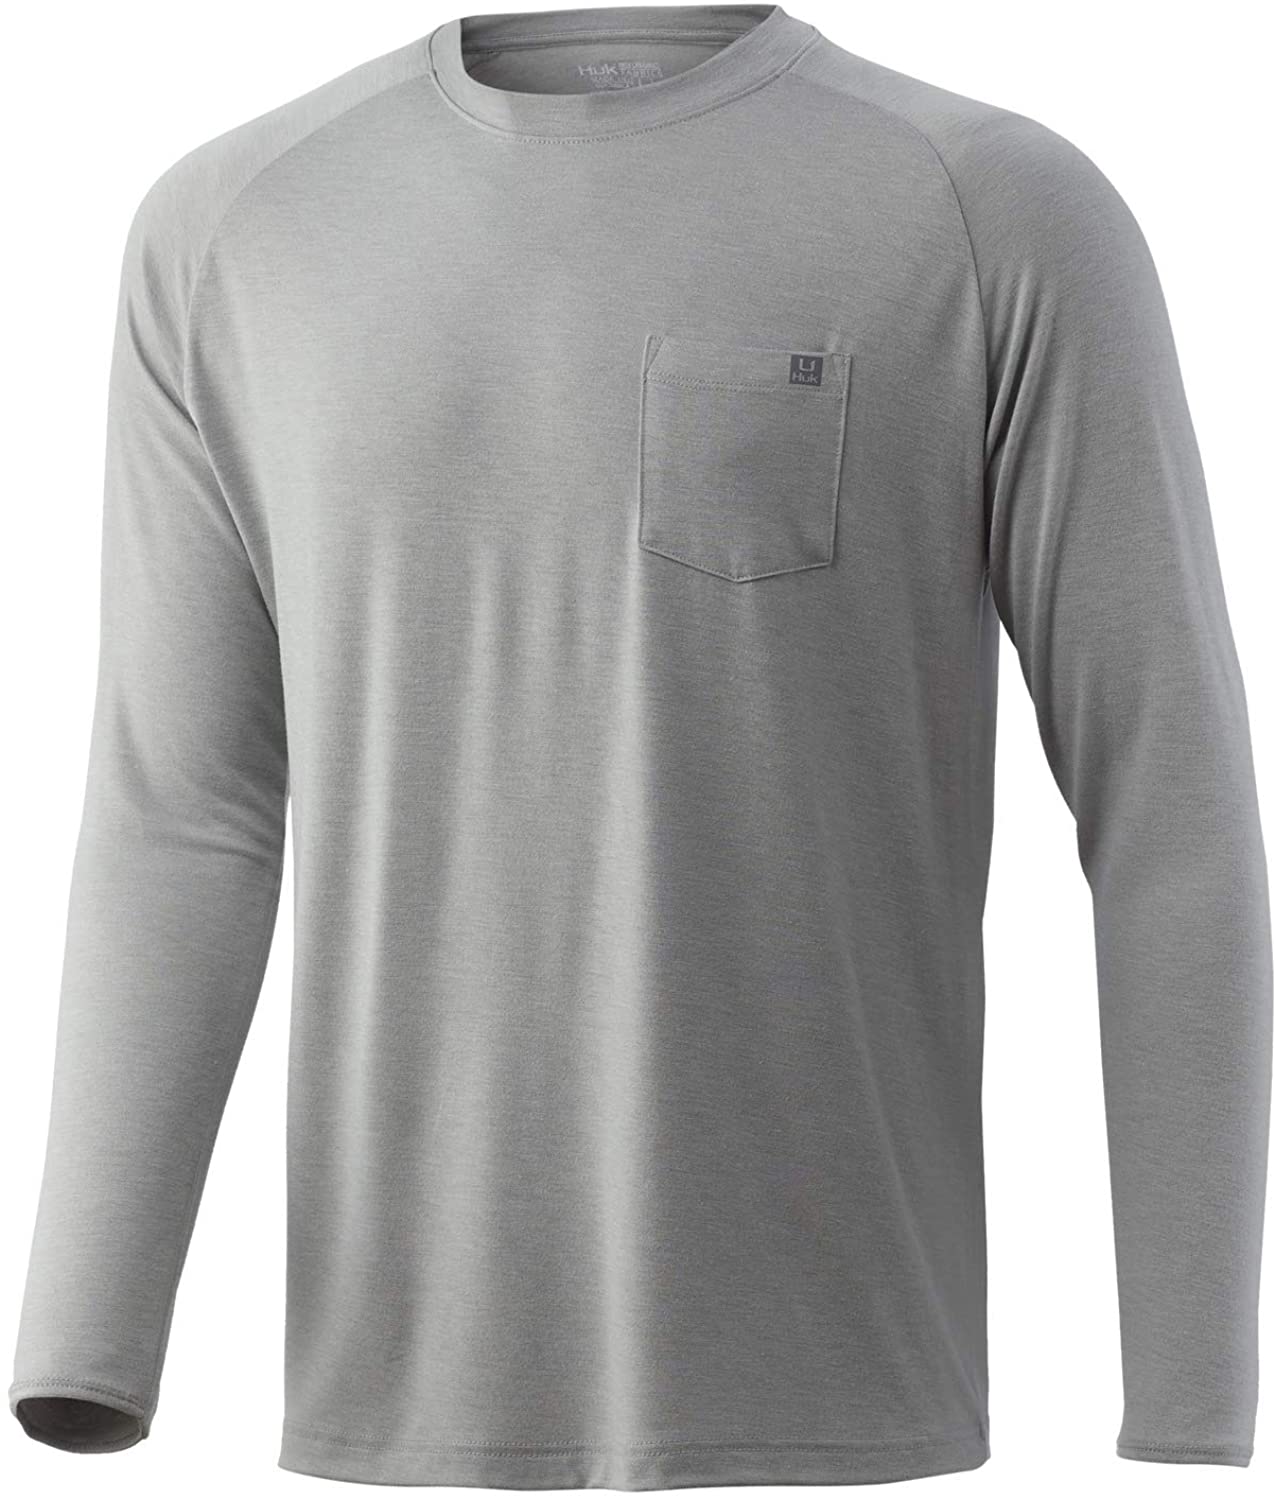 Men's Huk Waypoint Long Sleeve Shirt in Grey from the front